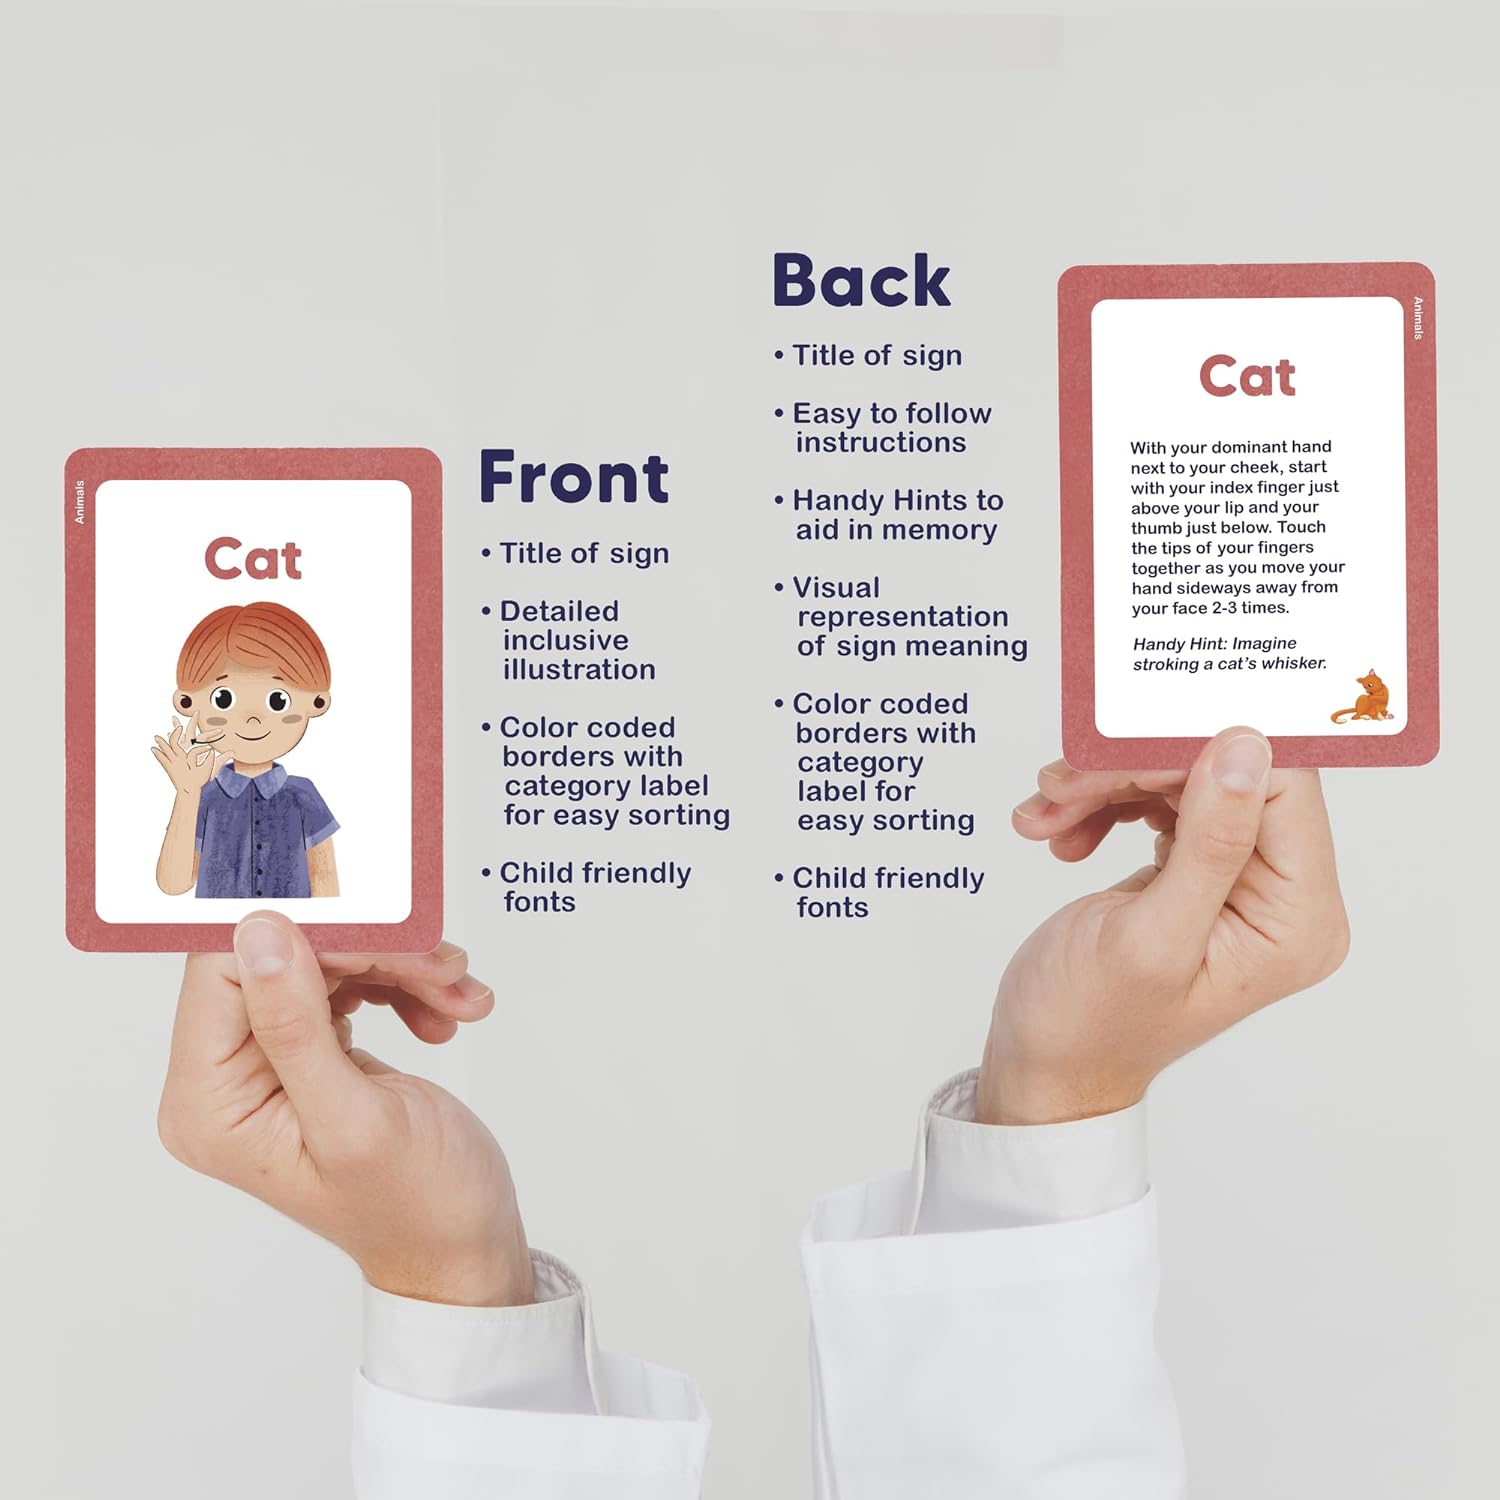 ASL Kids Flash Cards - The Ultimate Tool for Learning American Sign Language